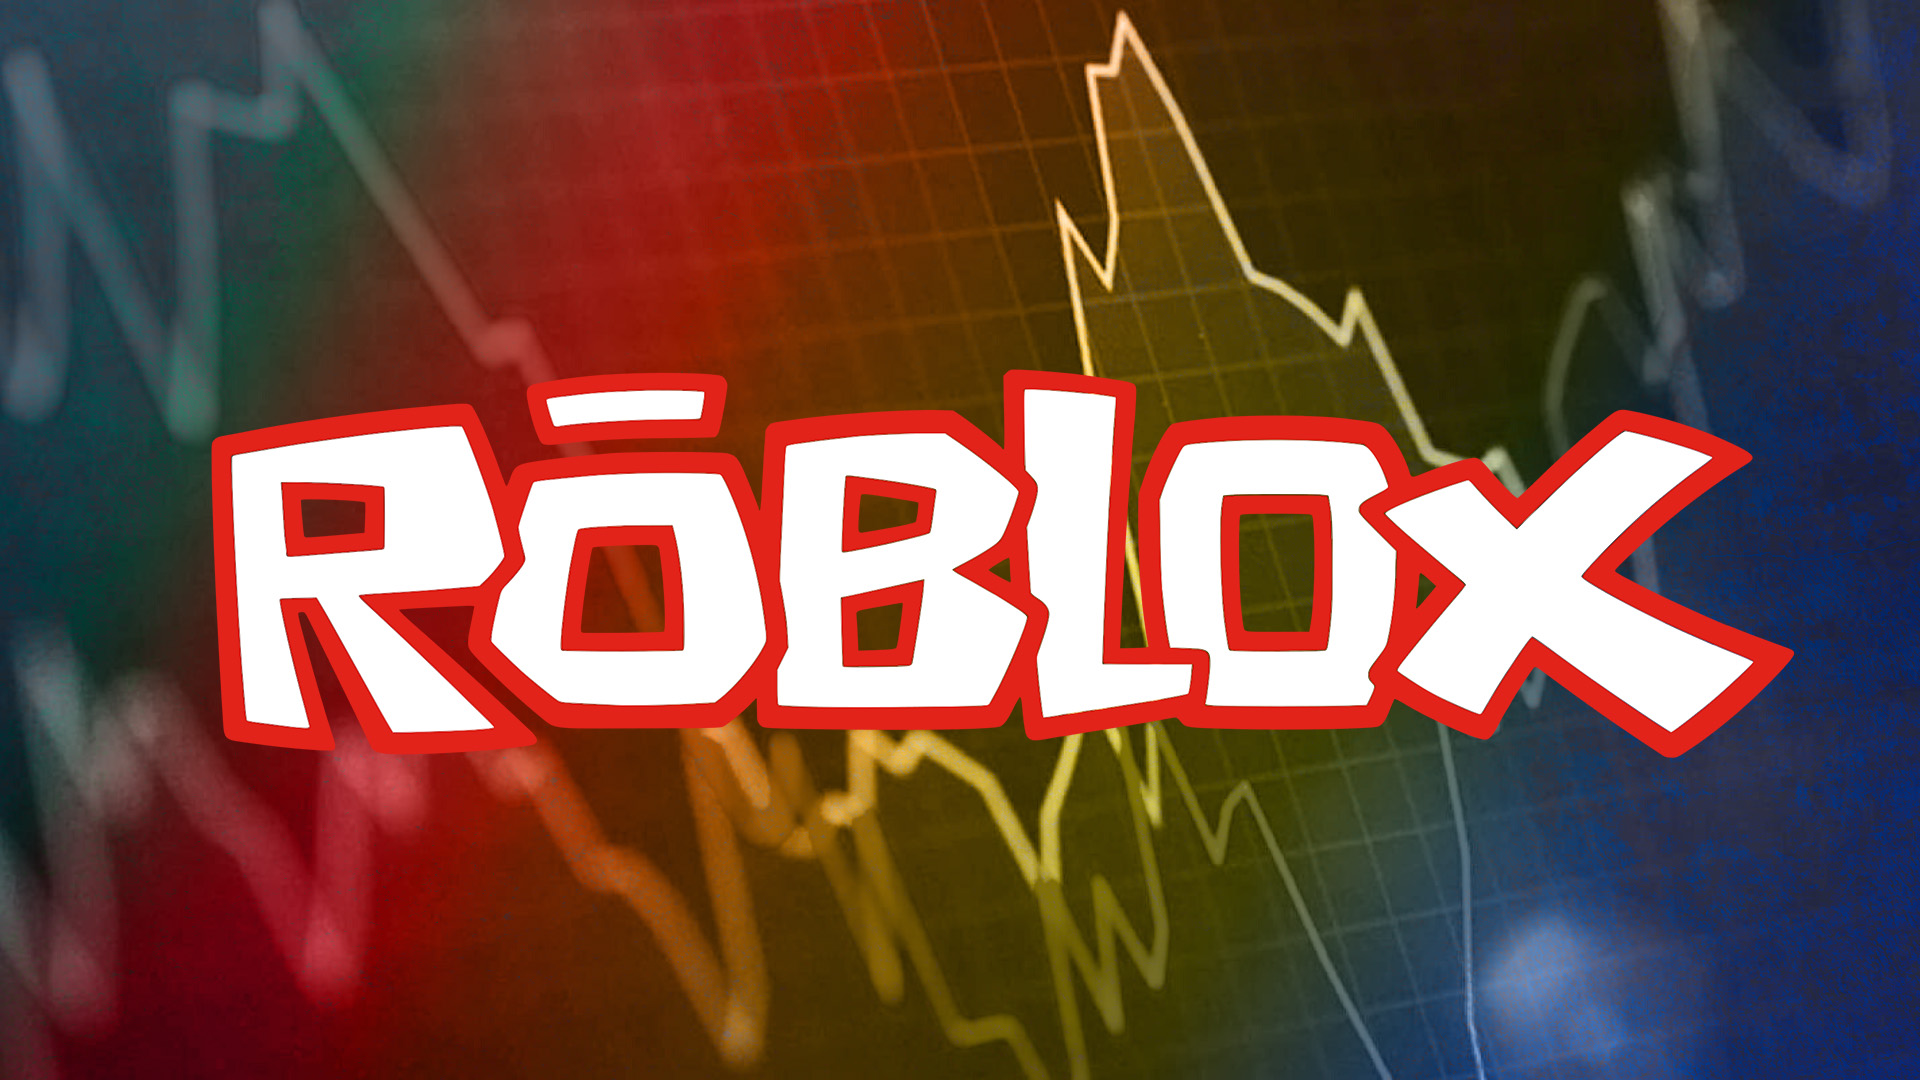 Why Is Roblox Stock Going Down And Will There Be A Reversal? (NYSE